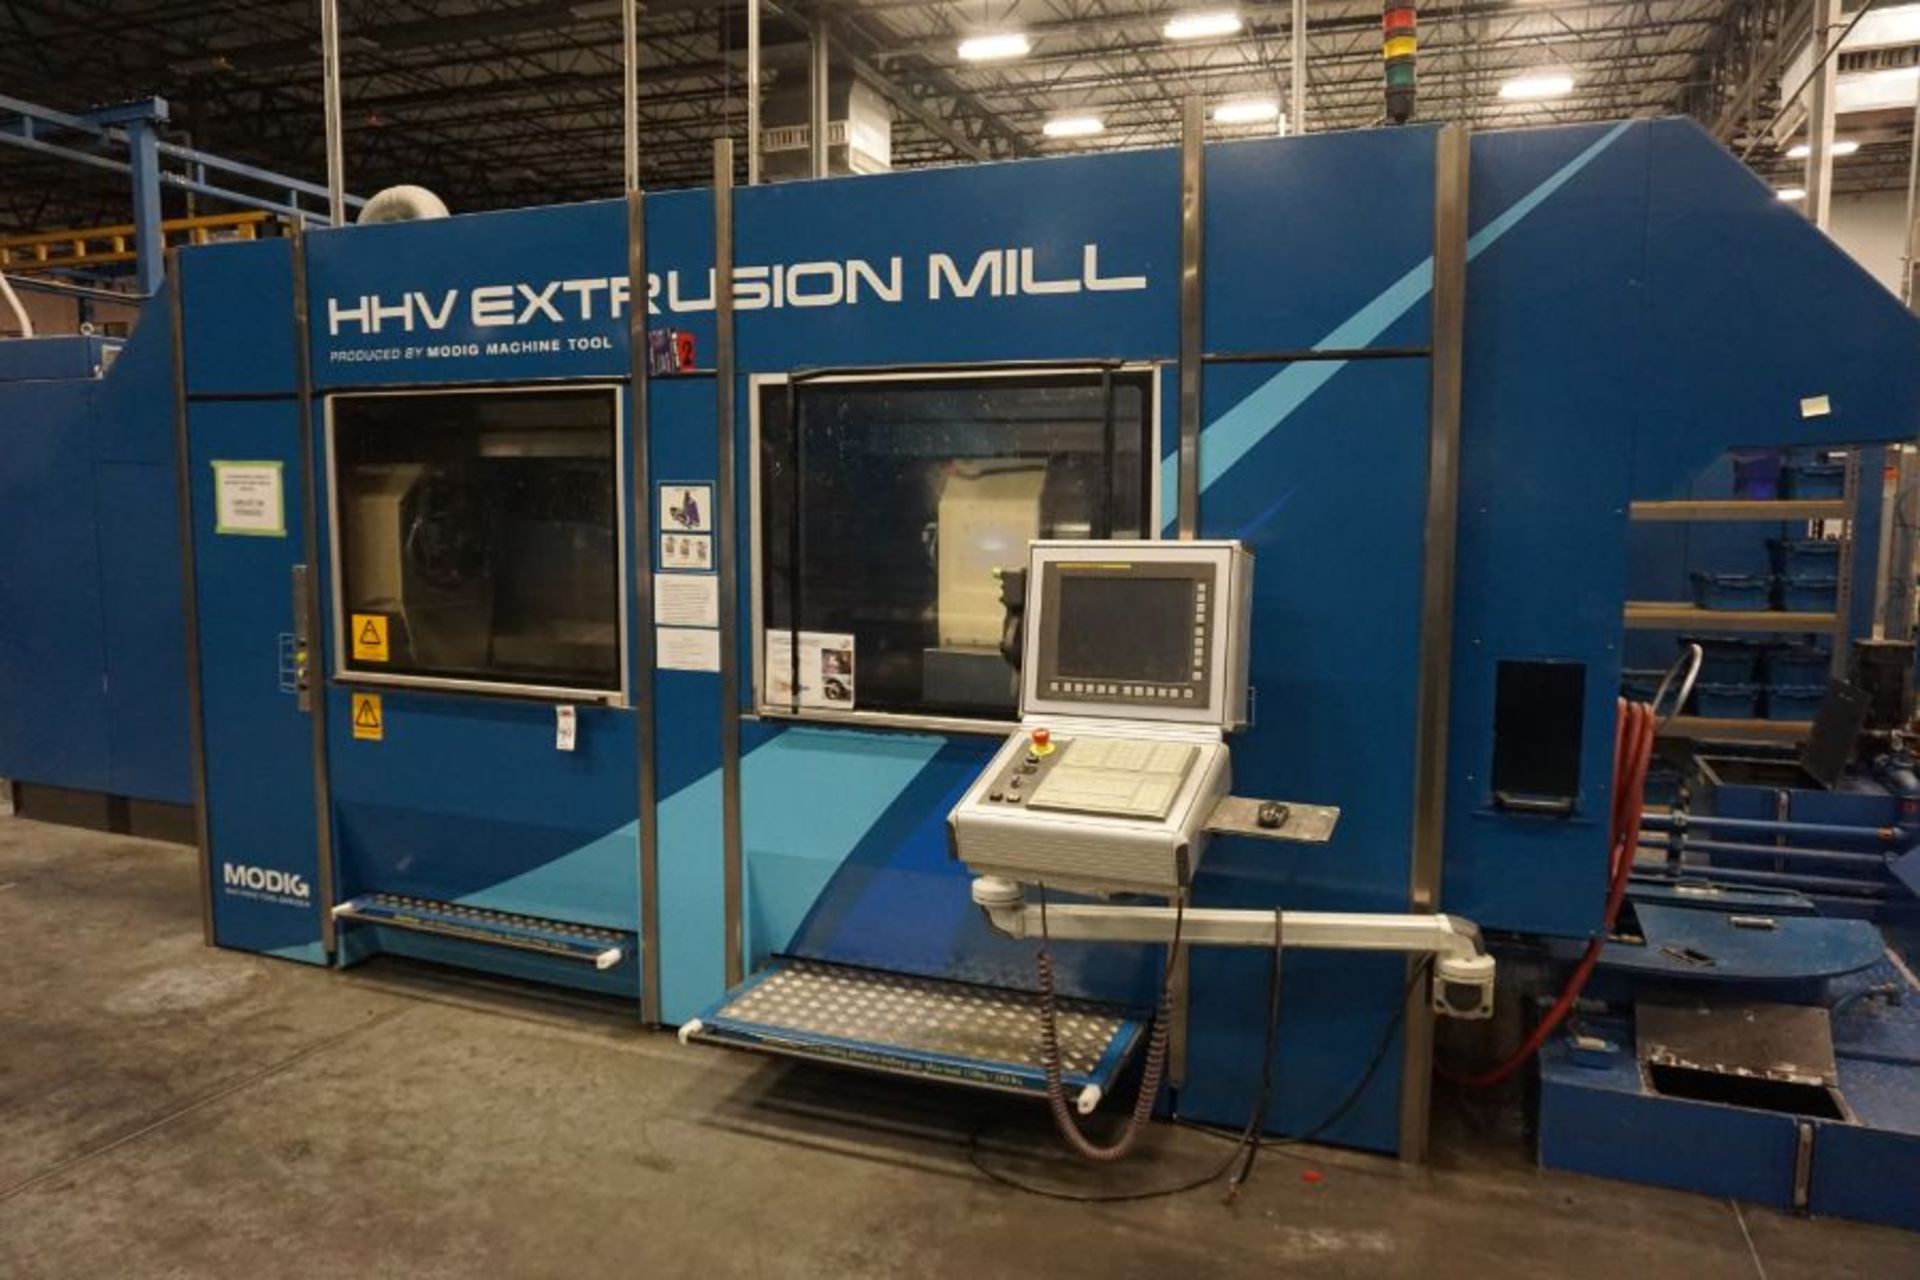 Modig HHV 4-Axis High Speed Extrusion Mill, Fanuc 30i Model B, Fischer 1700 mm 30K Spindle, 28000 - Image 2 of 18